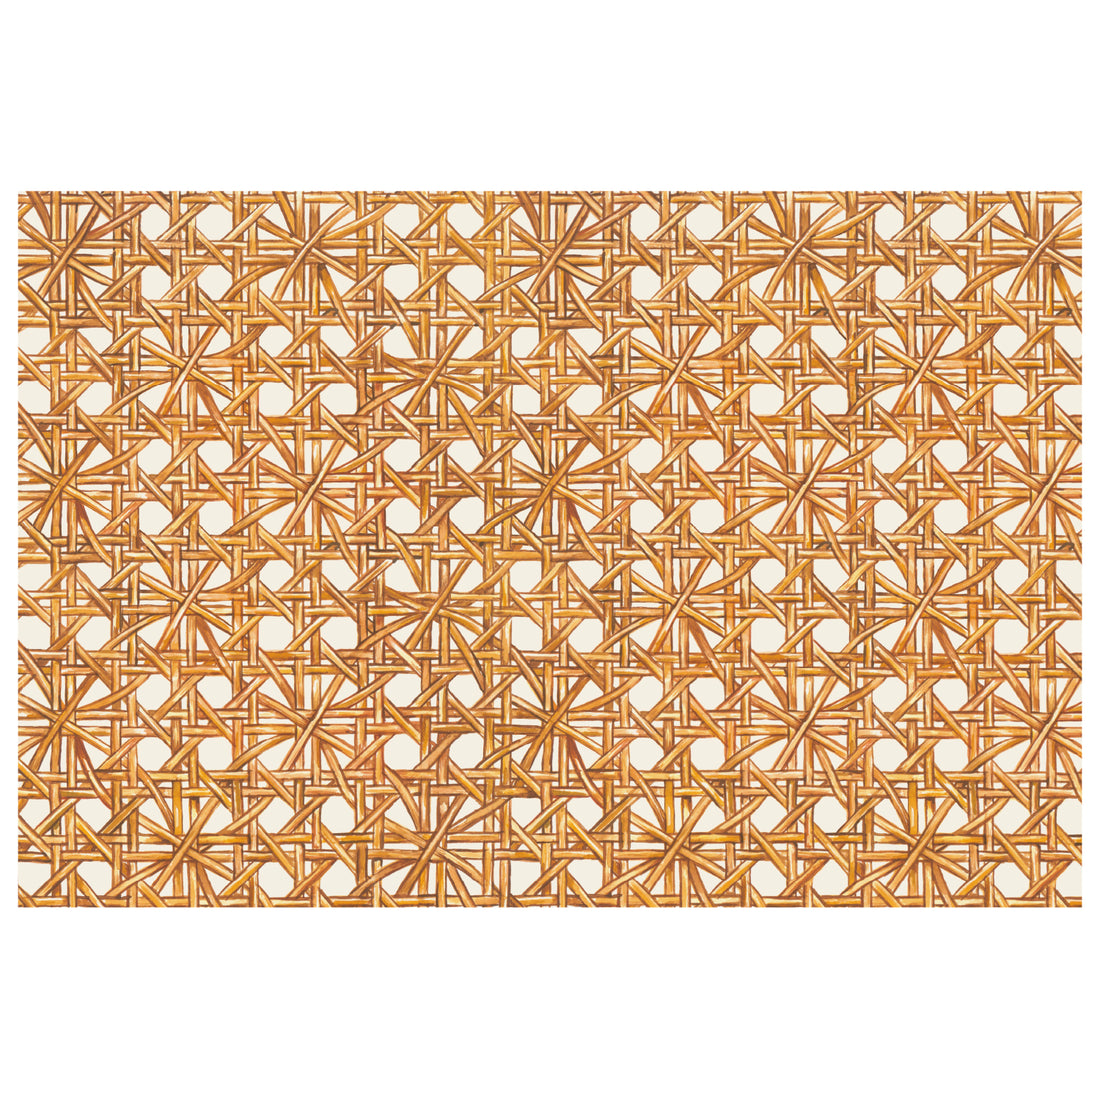 An illustrated pattern of tan rattan strands woven together intricately over a white background. 